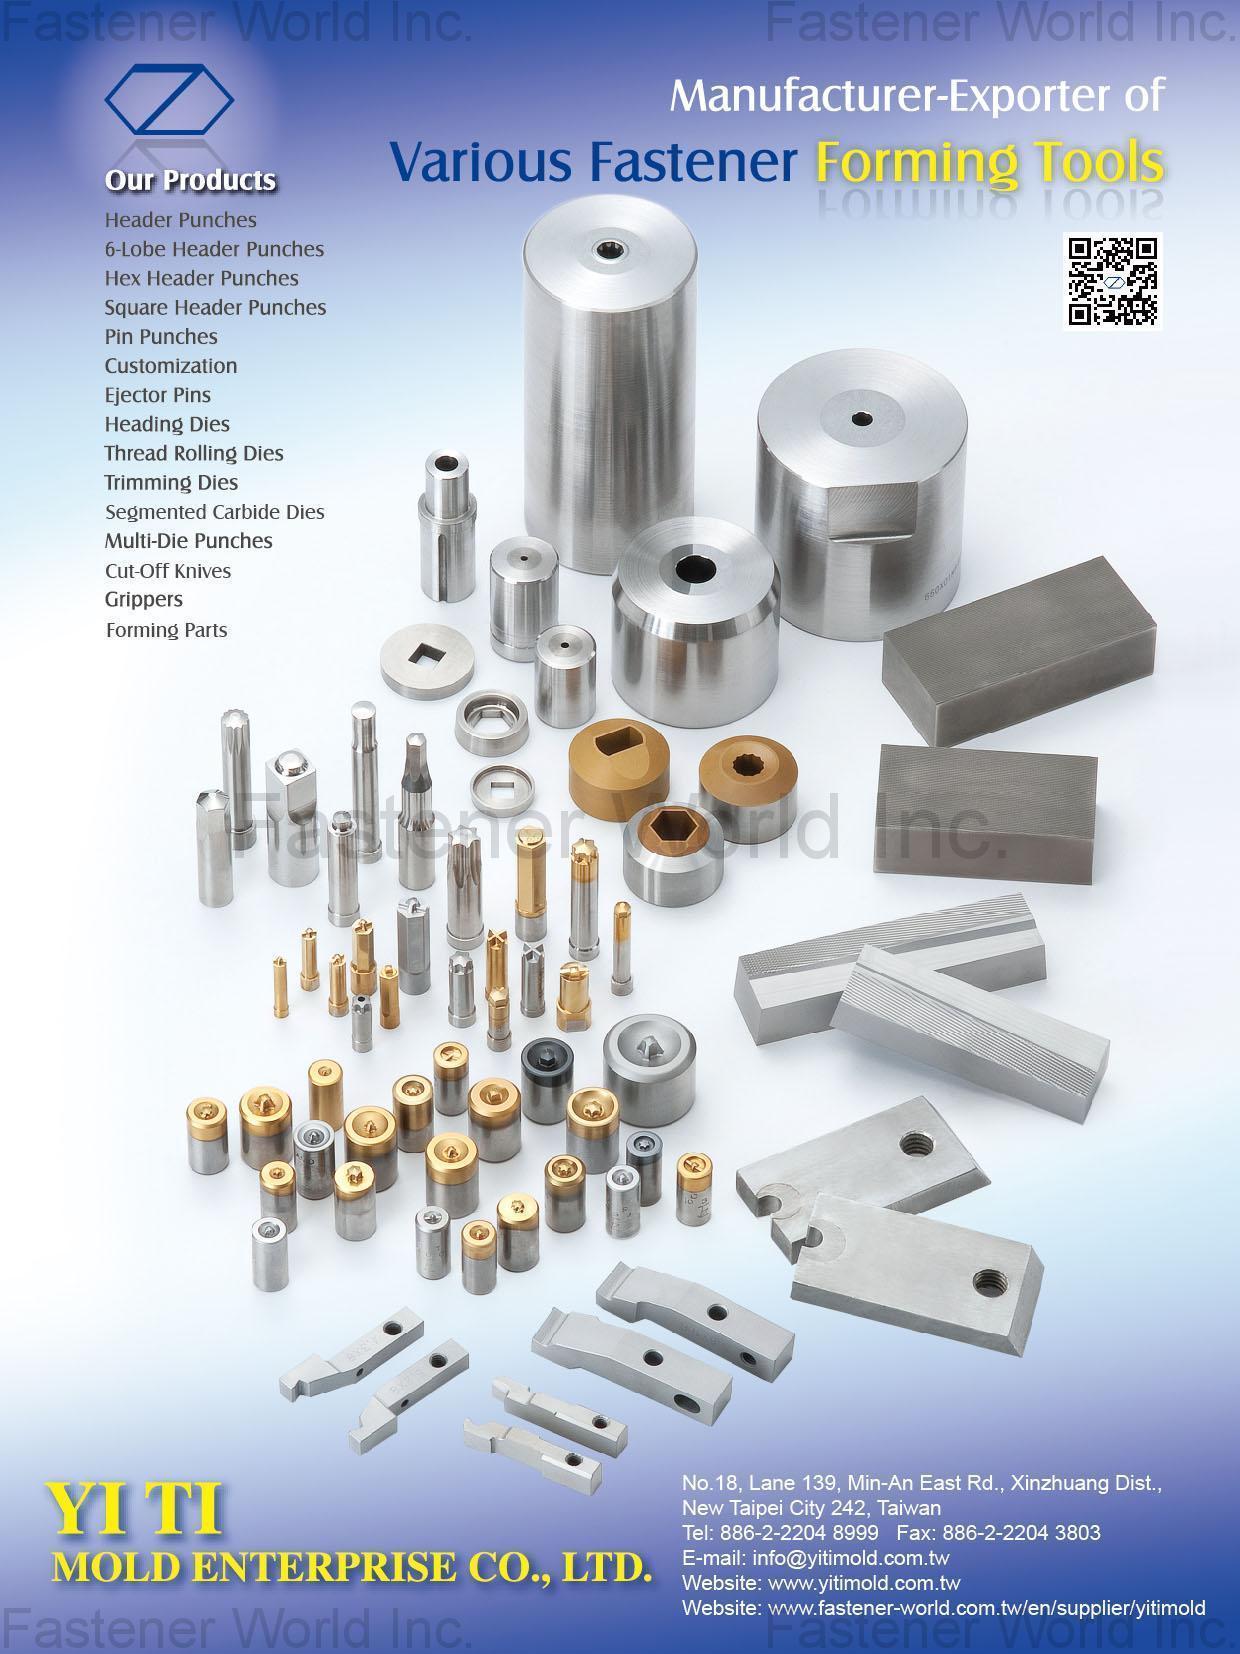 YI TI MOLD ENTERPRISE CO., LTD.  , Header Punches,6-Lobe Header Punches,Hex Header Punches,Square Header Punches,Pin Punches,Customization,Ejector Pins,Headling Dies,Thread Rolling Dies,Trimming Dies,Segmented Carbide Dies,Multi-Die Punches,Cut-Off Knives,Grippers,Forming Parts , Header Punches